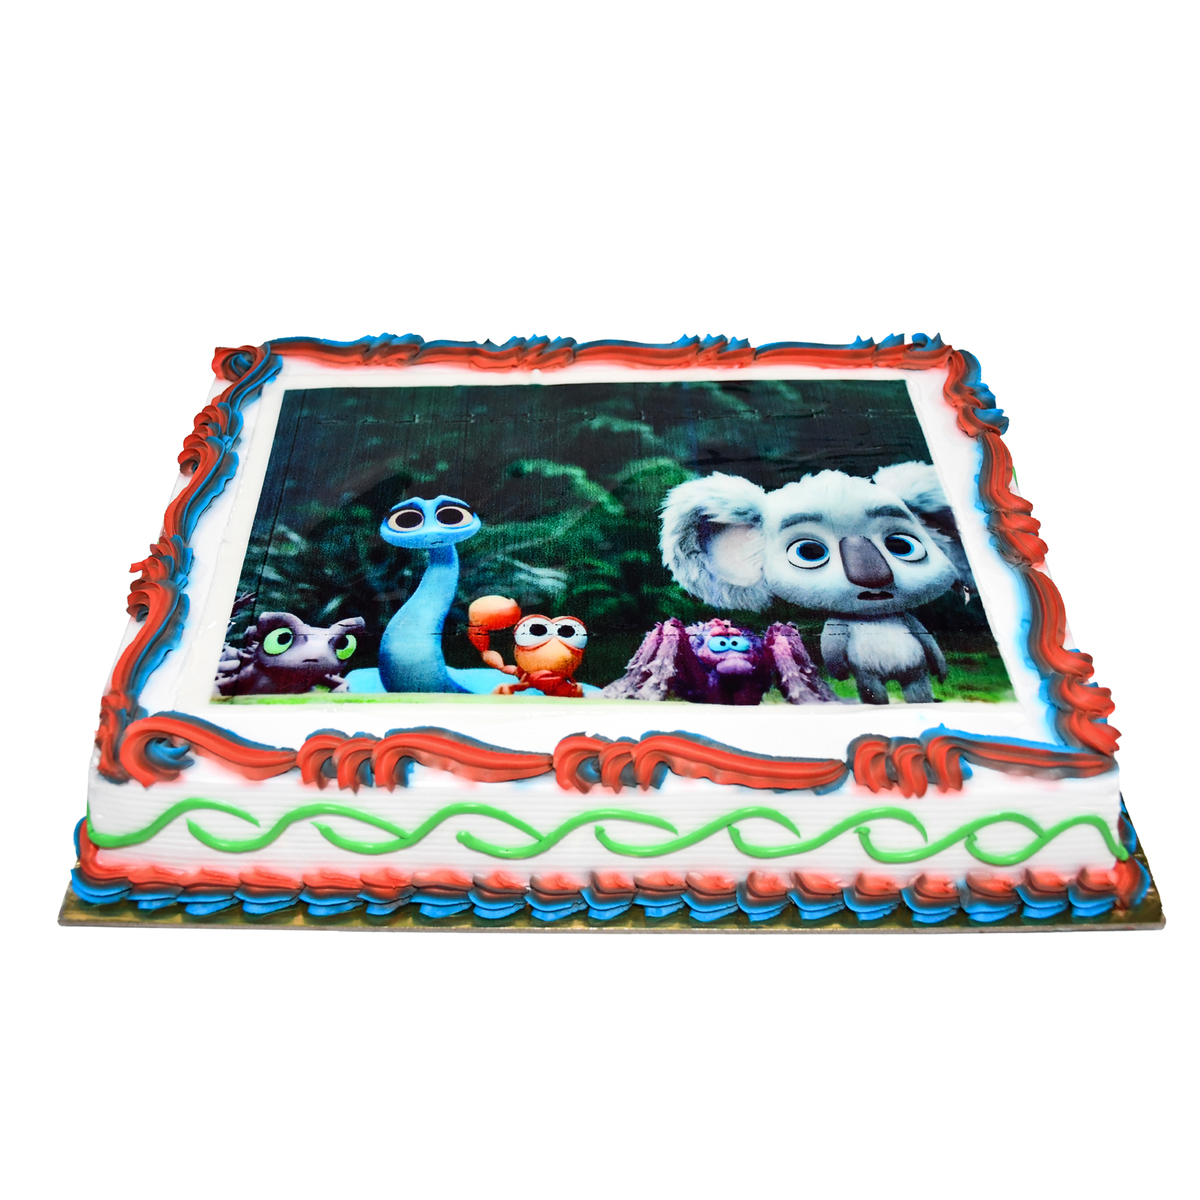 Picture Cake 2 kg